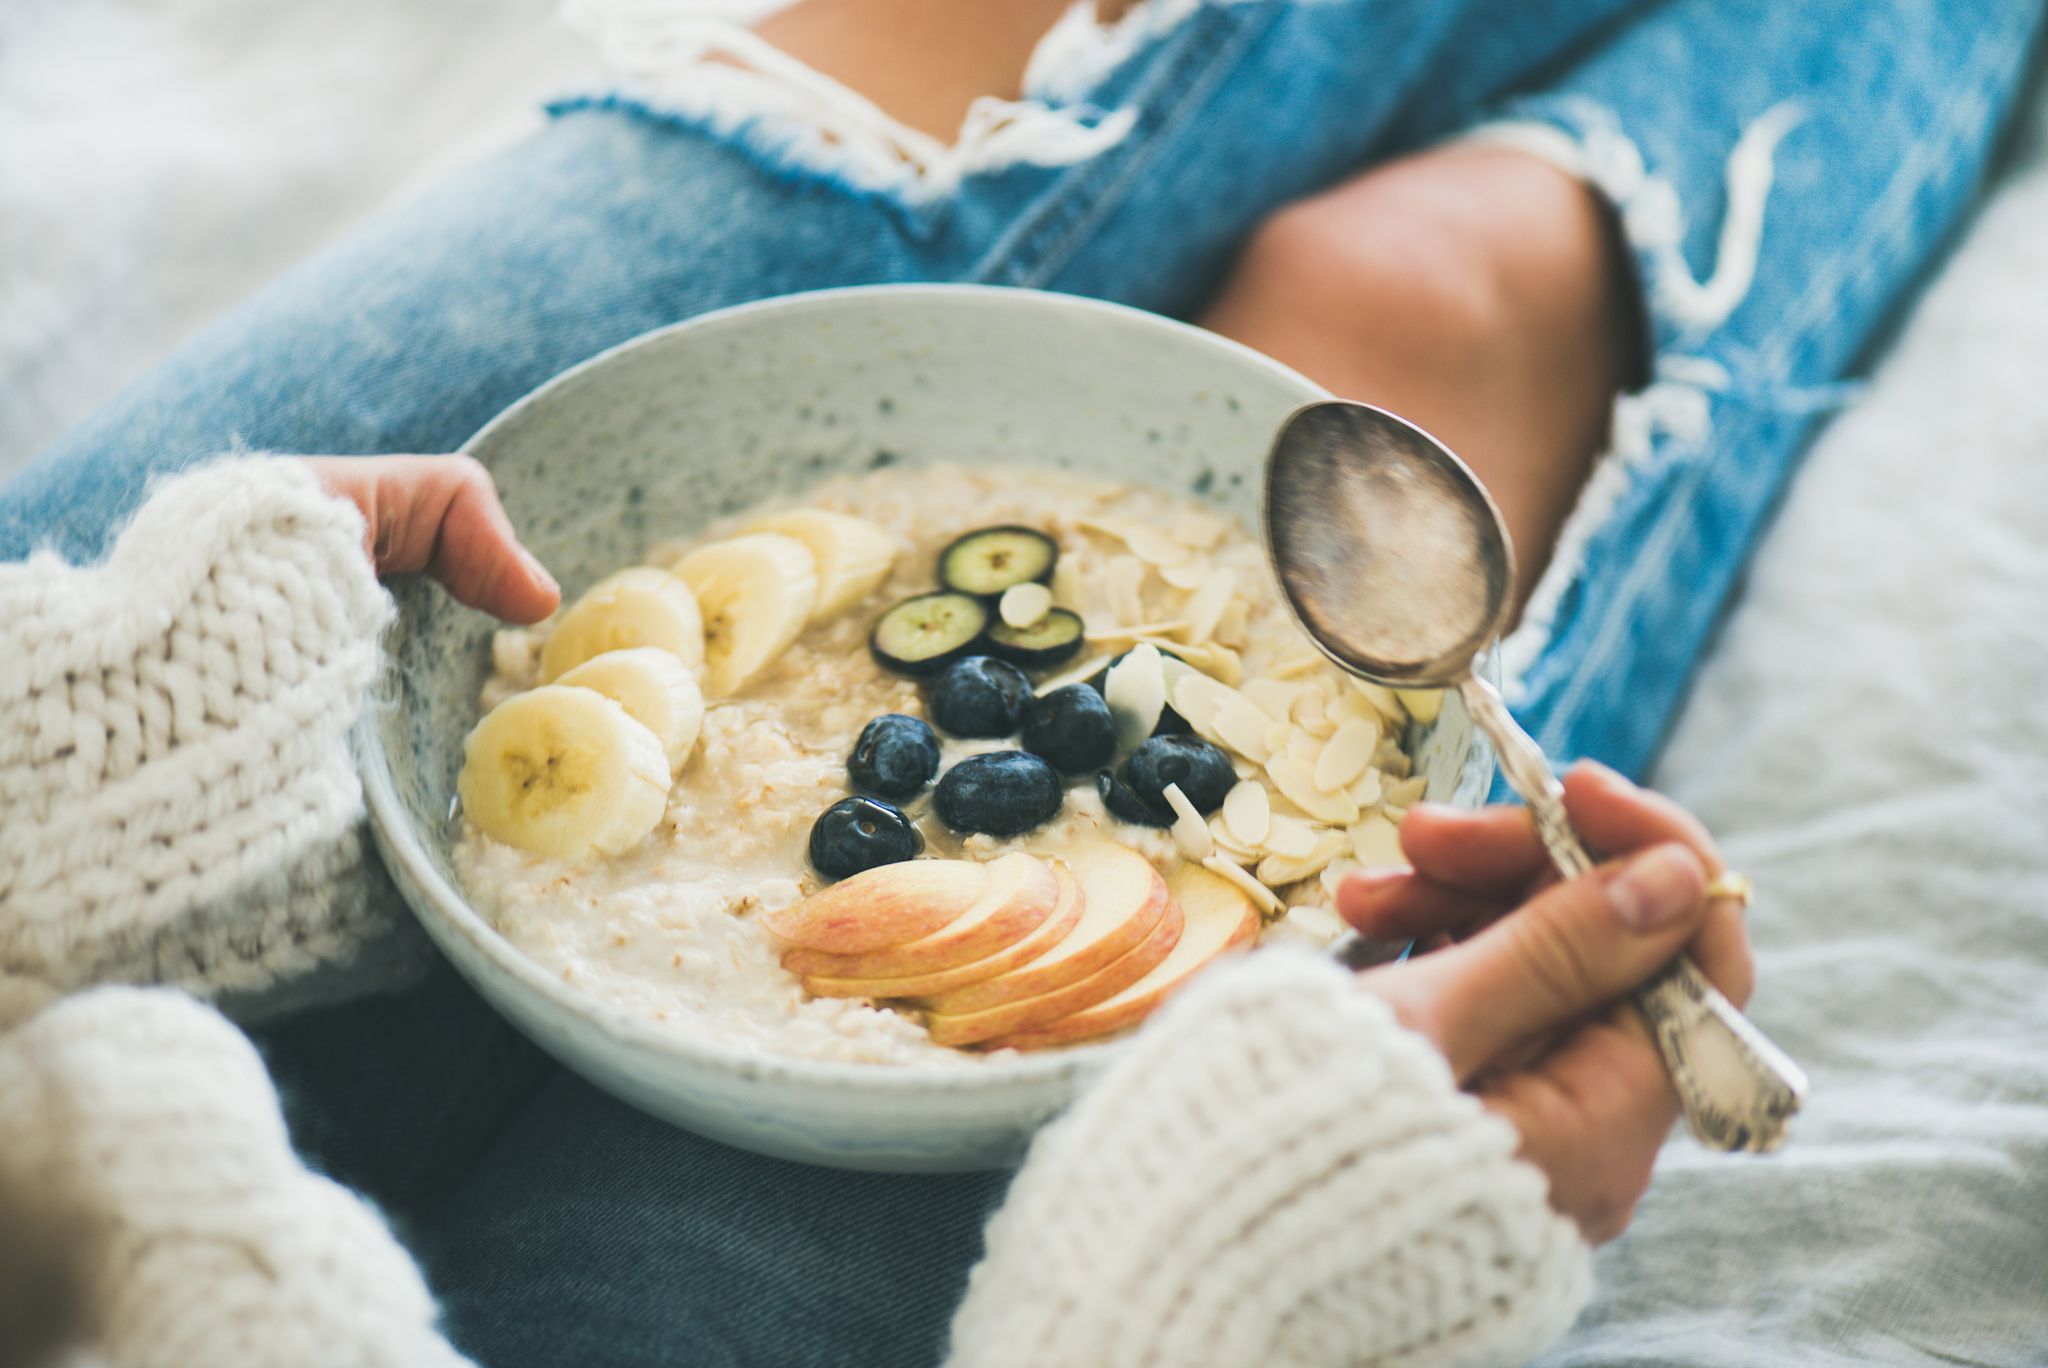 what are the healthiest toppings for porridge?